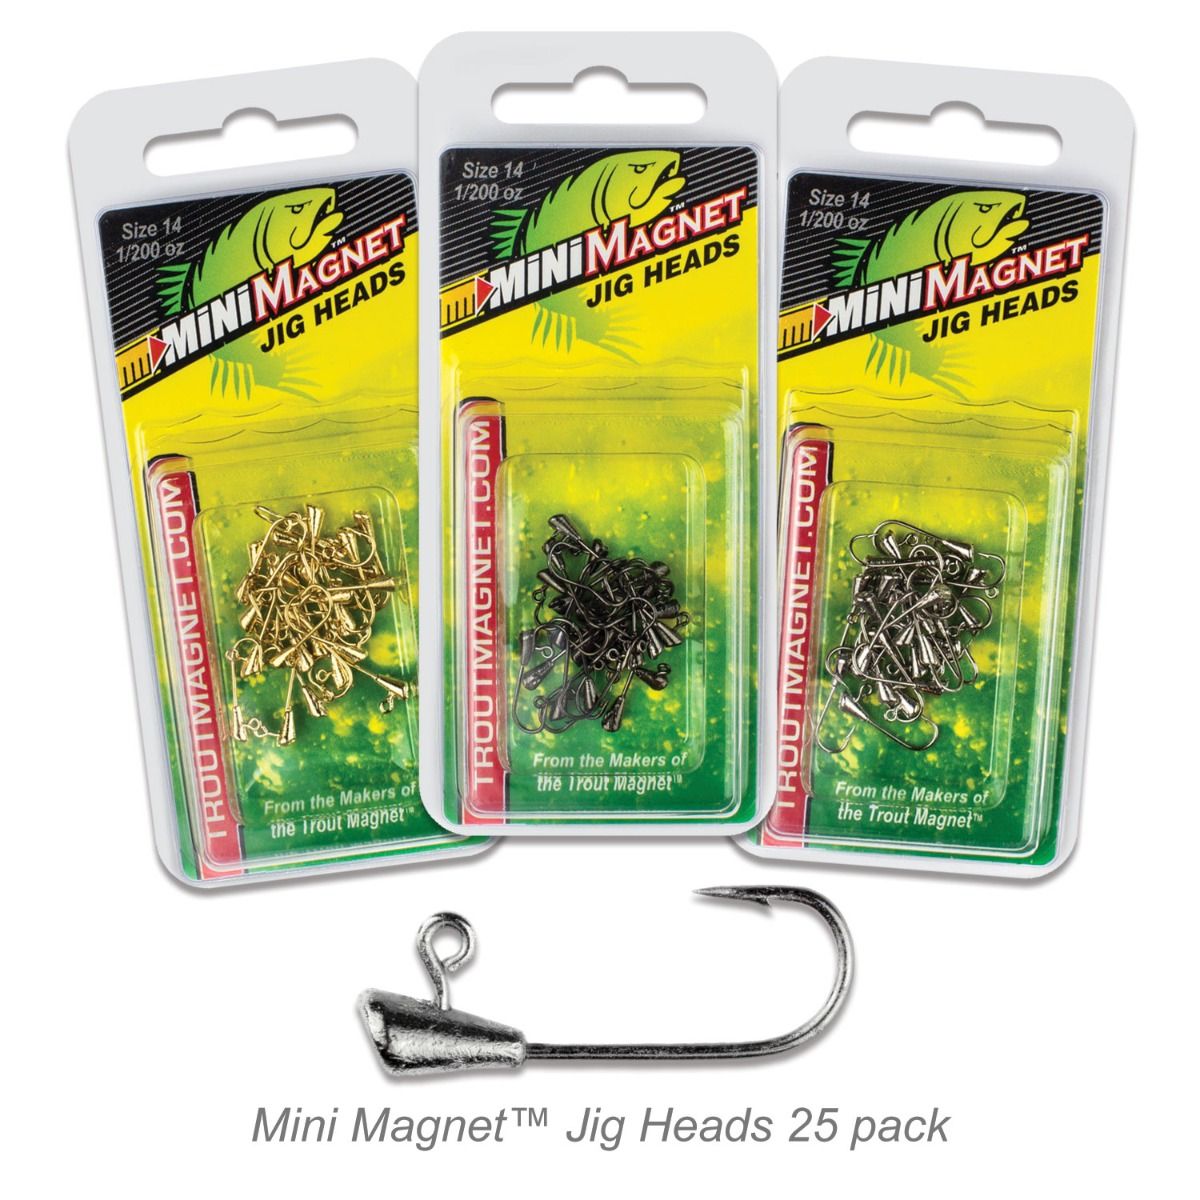 Trout Magnet 9pc Pack – TuckerTackle